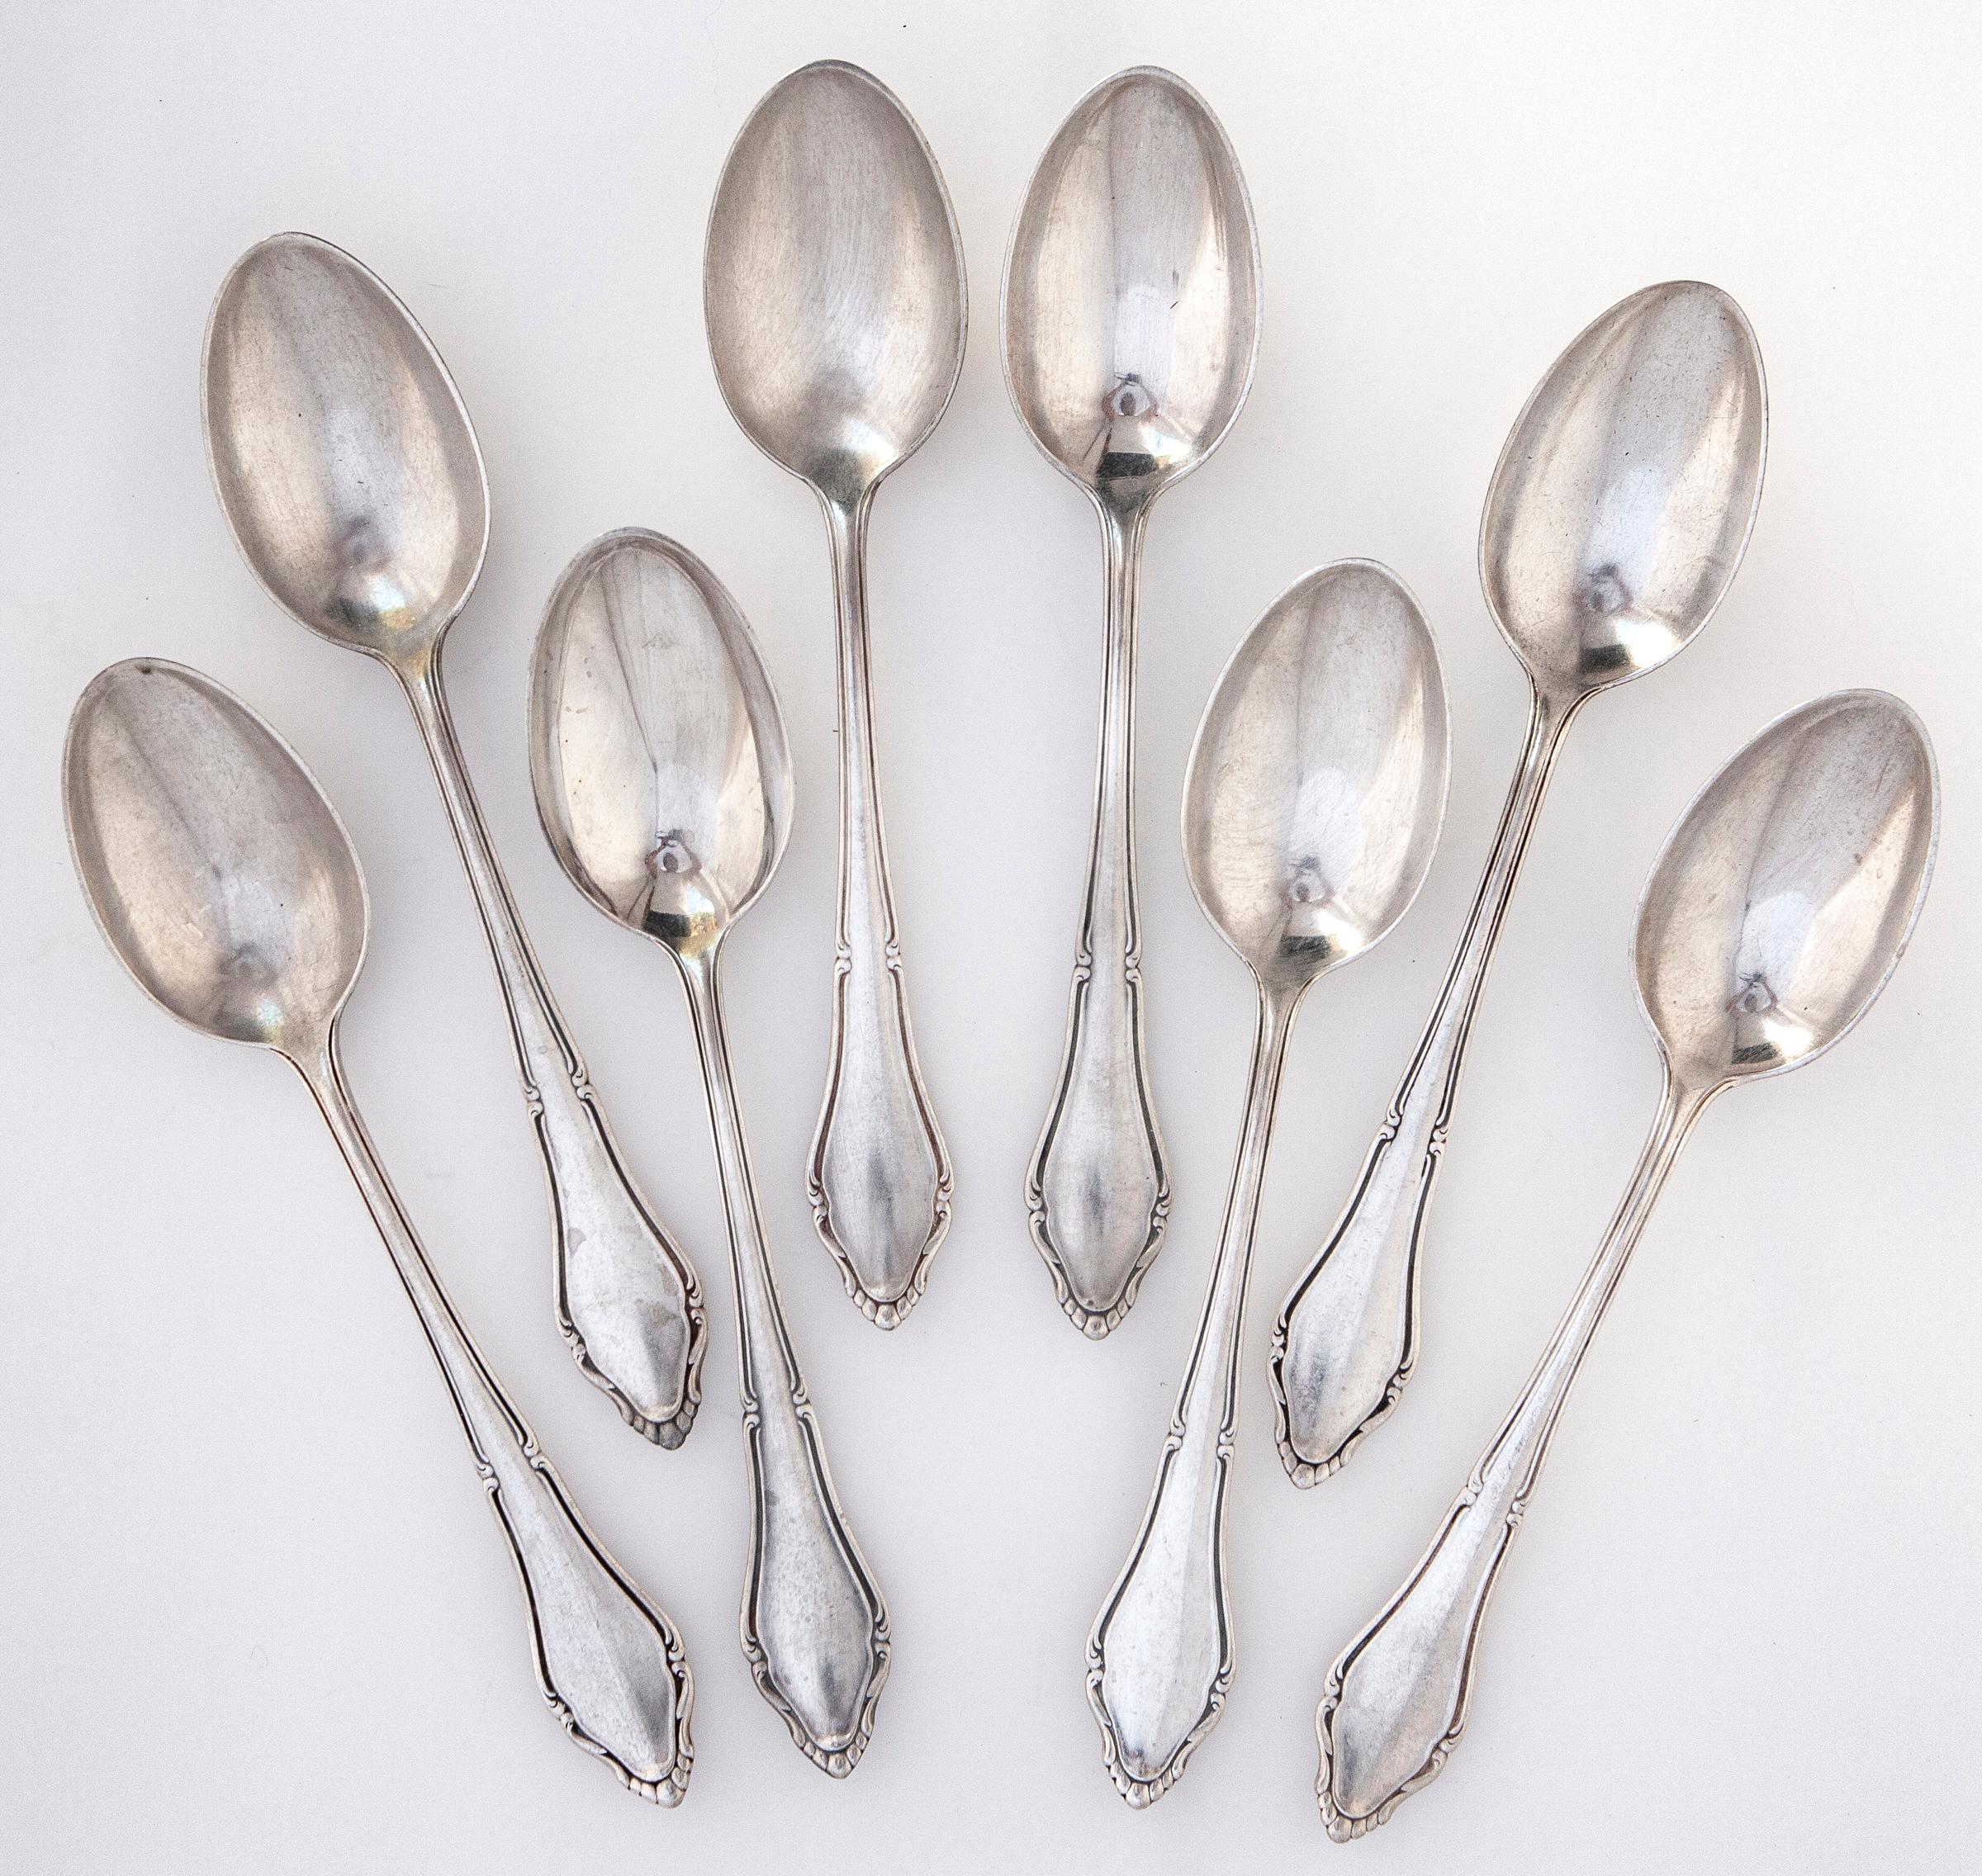 This flatware set is from one of the oldest & finest silverplate manufacturers in Germany.
 On separate listing, you will find; knives, forks, teapoons & serving pieces as well.